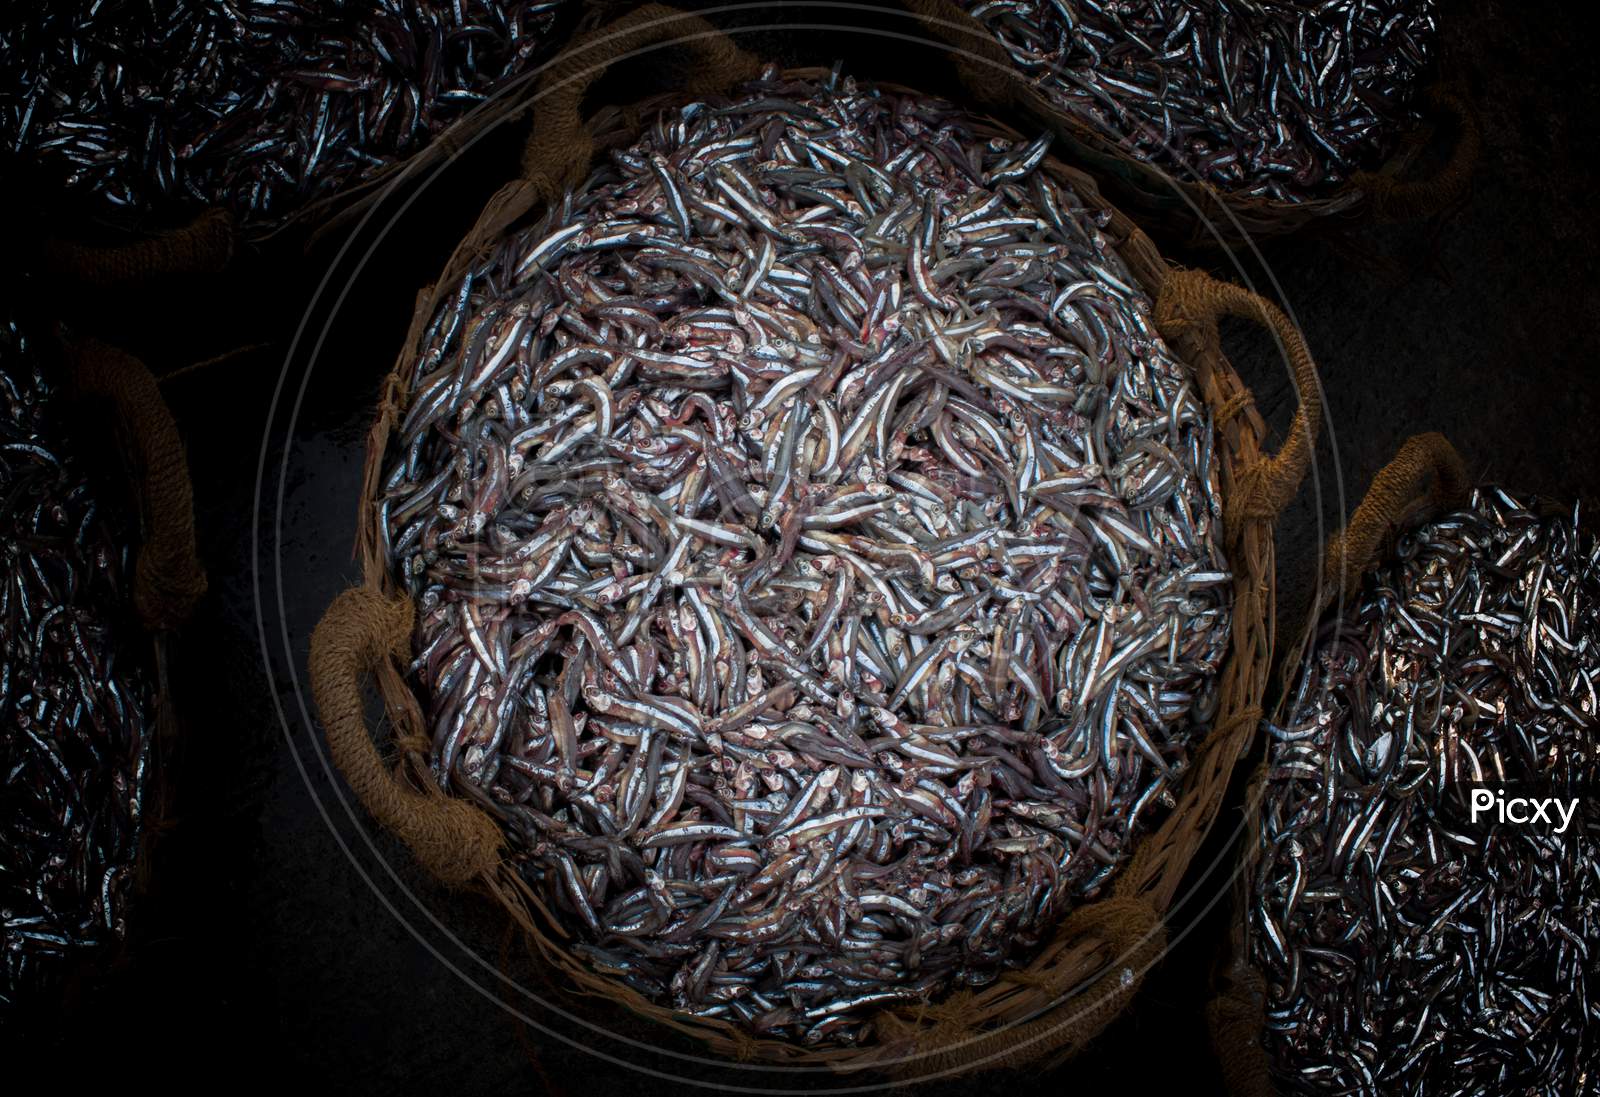 Collection Of Anchoviella Lepidentostole Fish In The Basket For Sale.